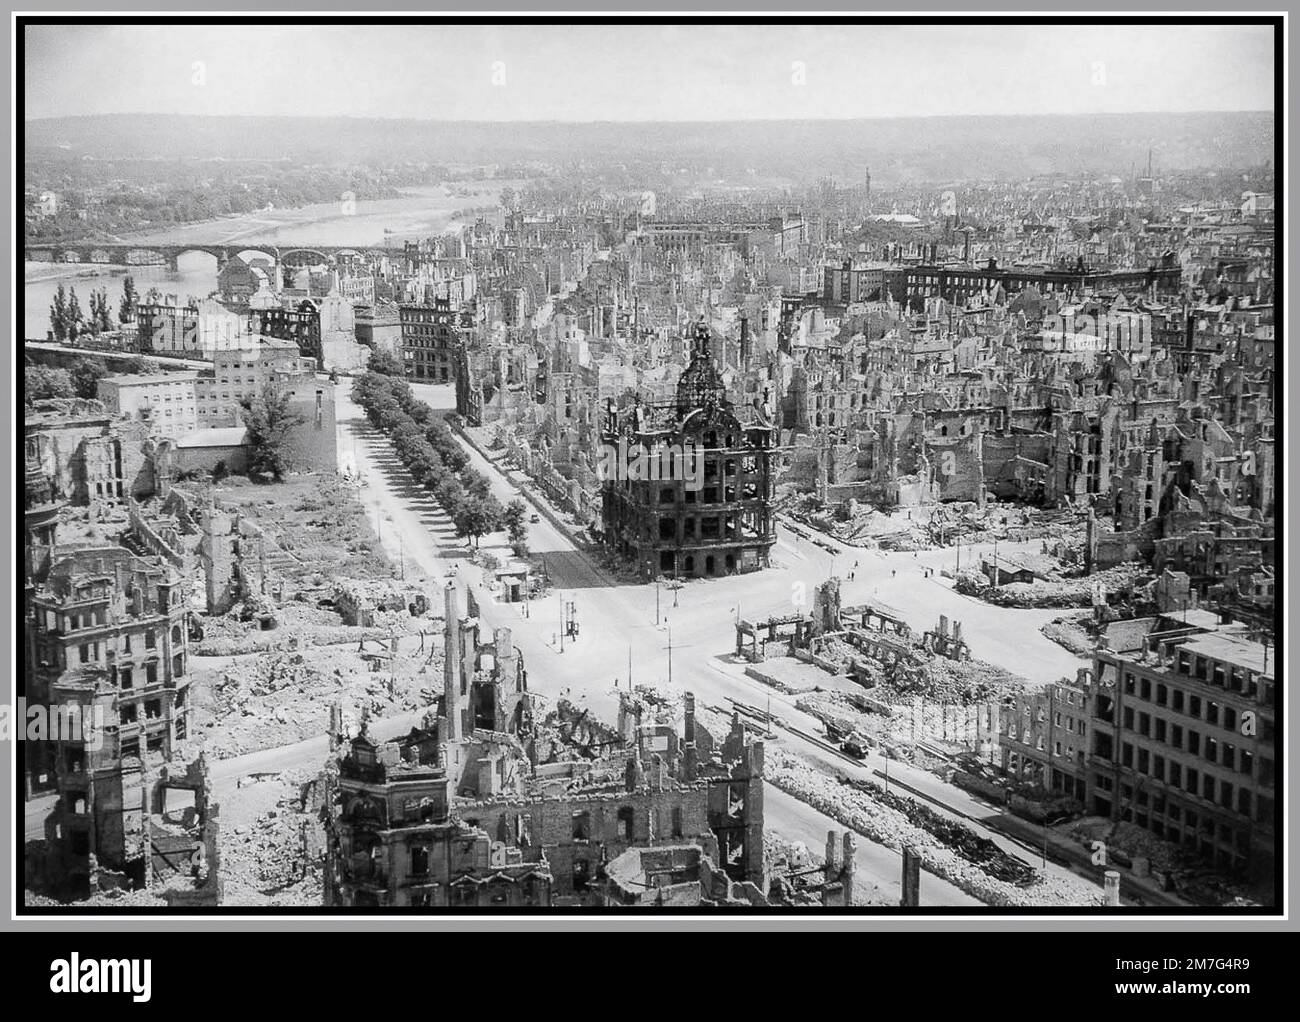 POST WAR WW2 1945 DRESDEN CITY BOMBING DEVASTATION GERMANY The rebuilding starts, with bombing rubble already removed.from the main streets, but buildings completely destroyed. Post-War Germany Stock Photo